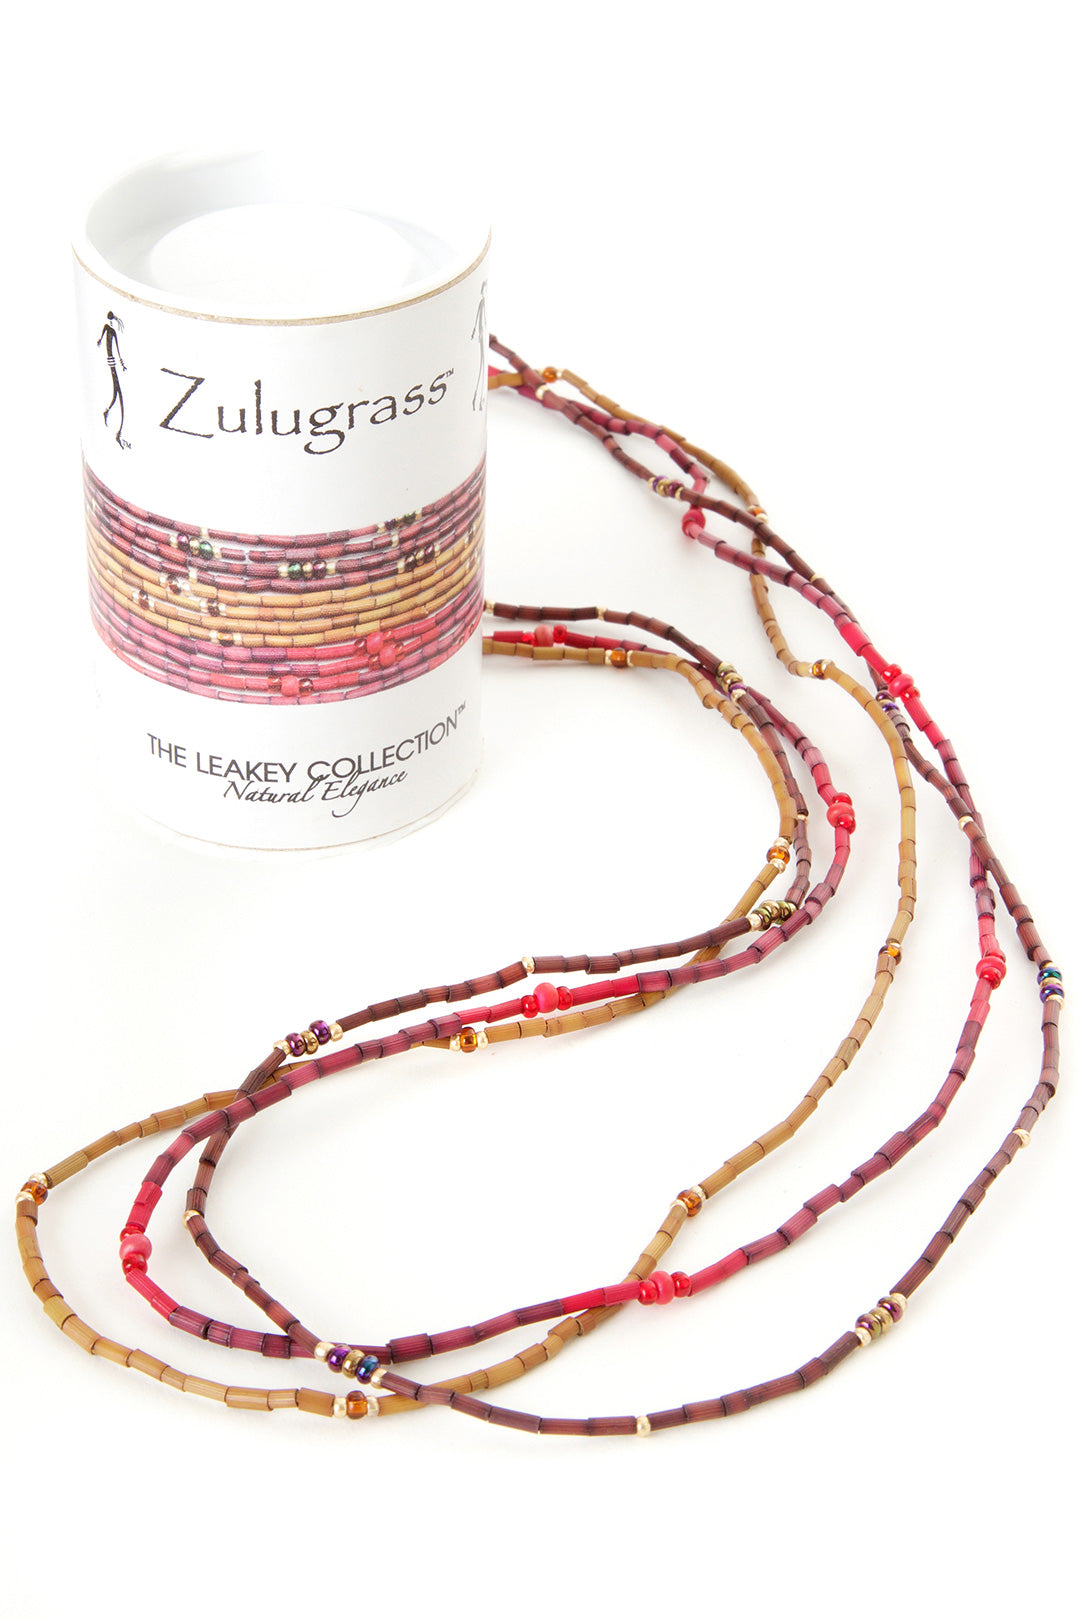 Zulugrass for Wine Lovers Set of Three Default Title